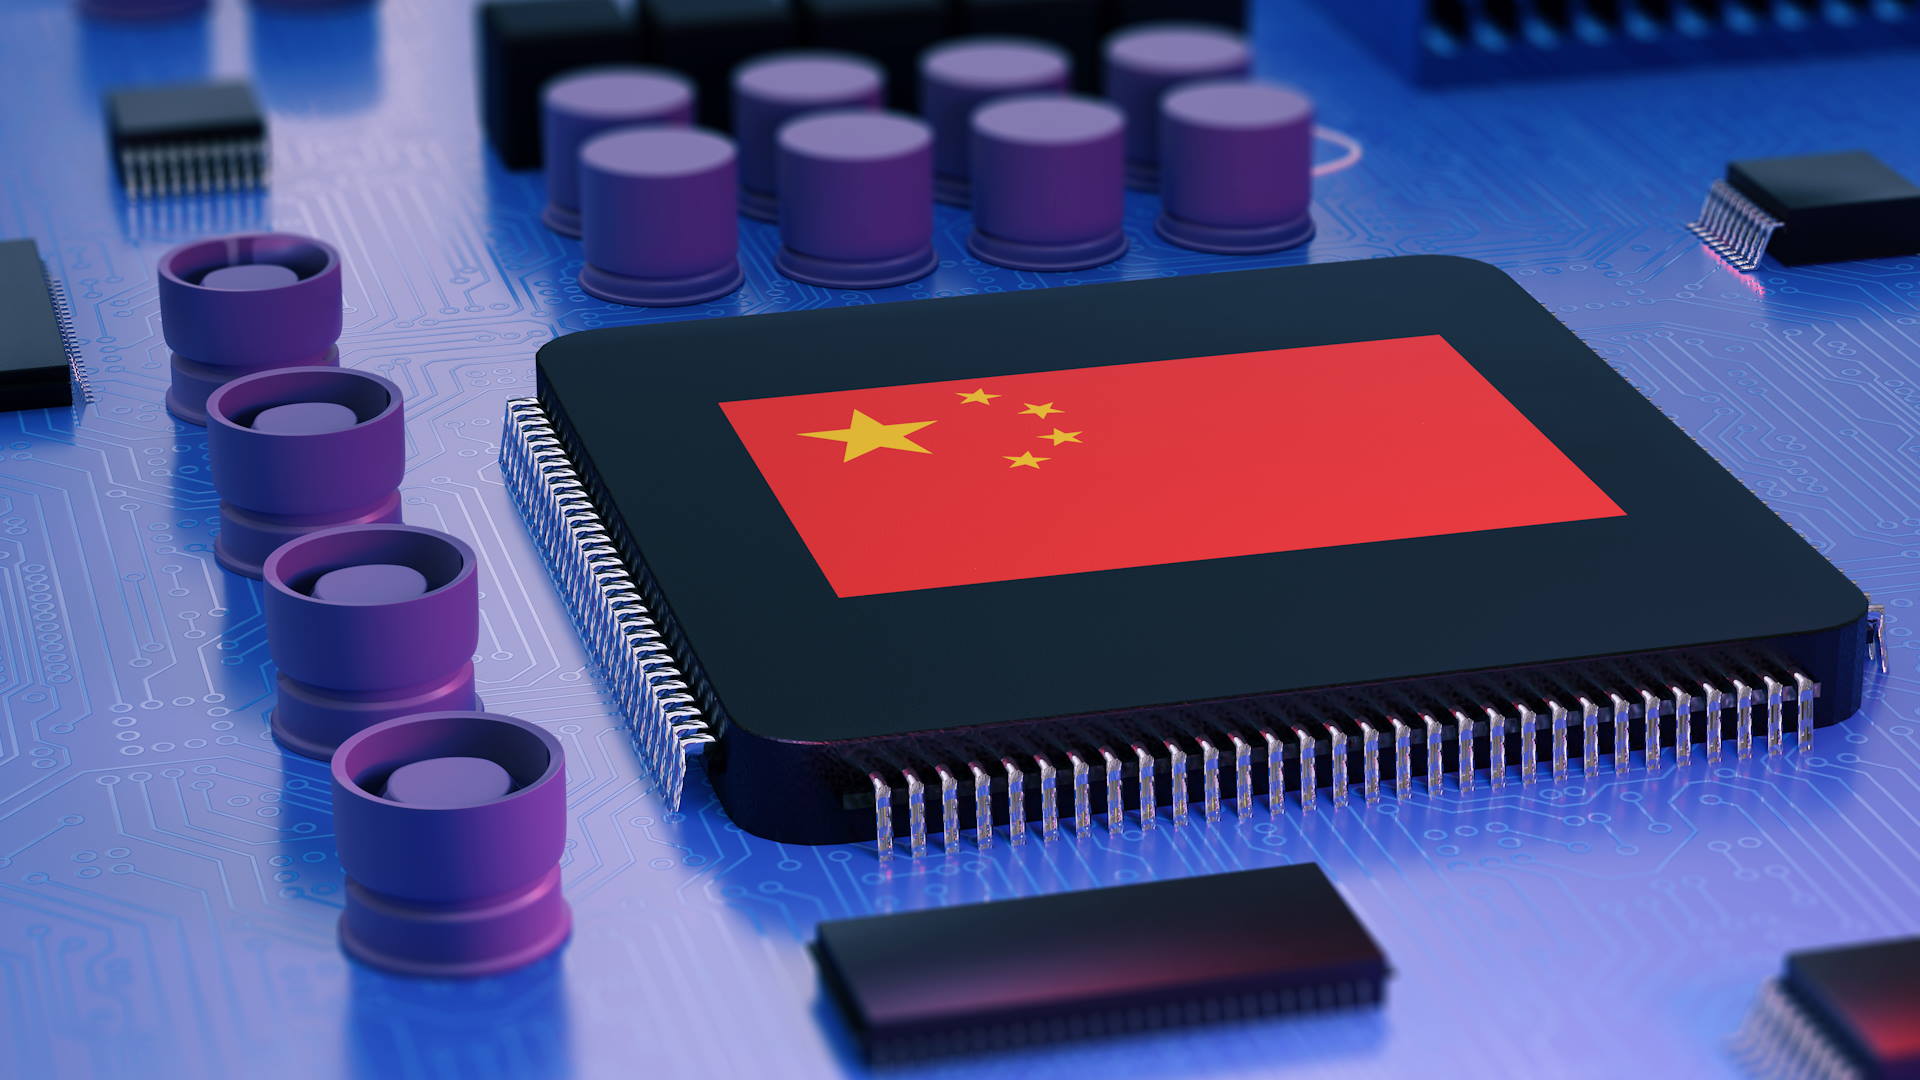 China adopts RISC-V technology, moving away from x86 and ARM